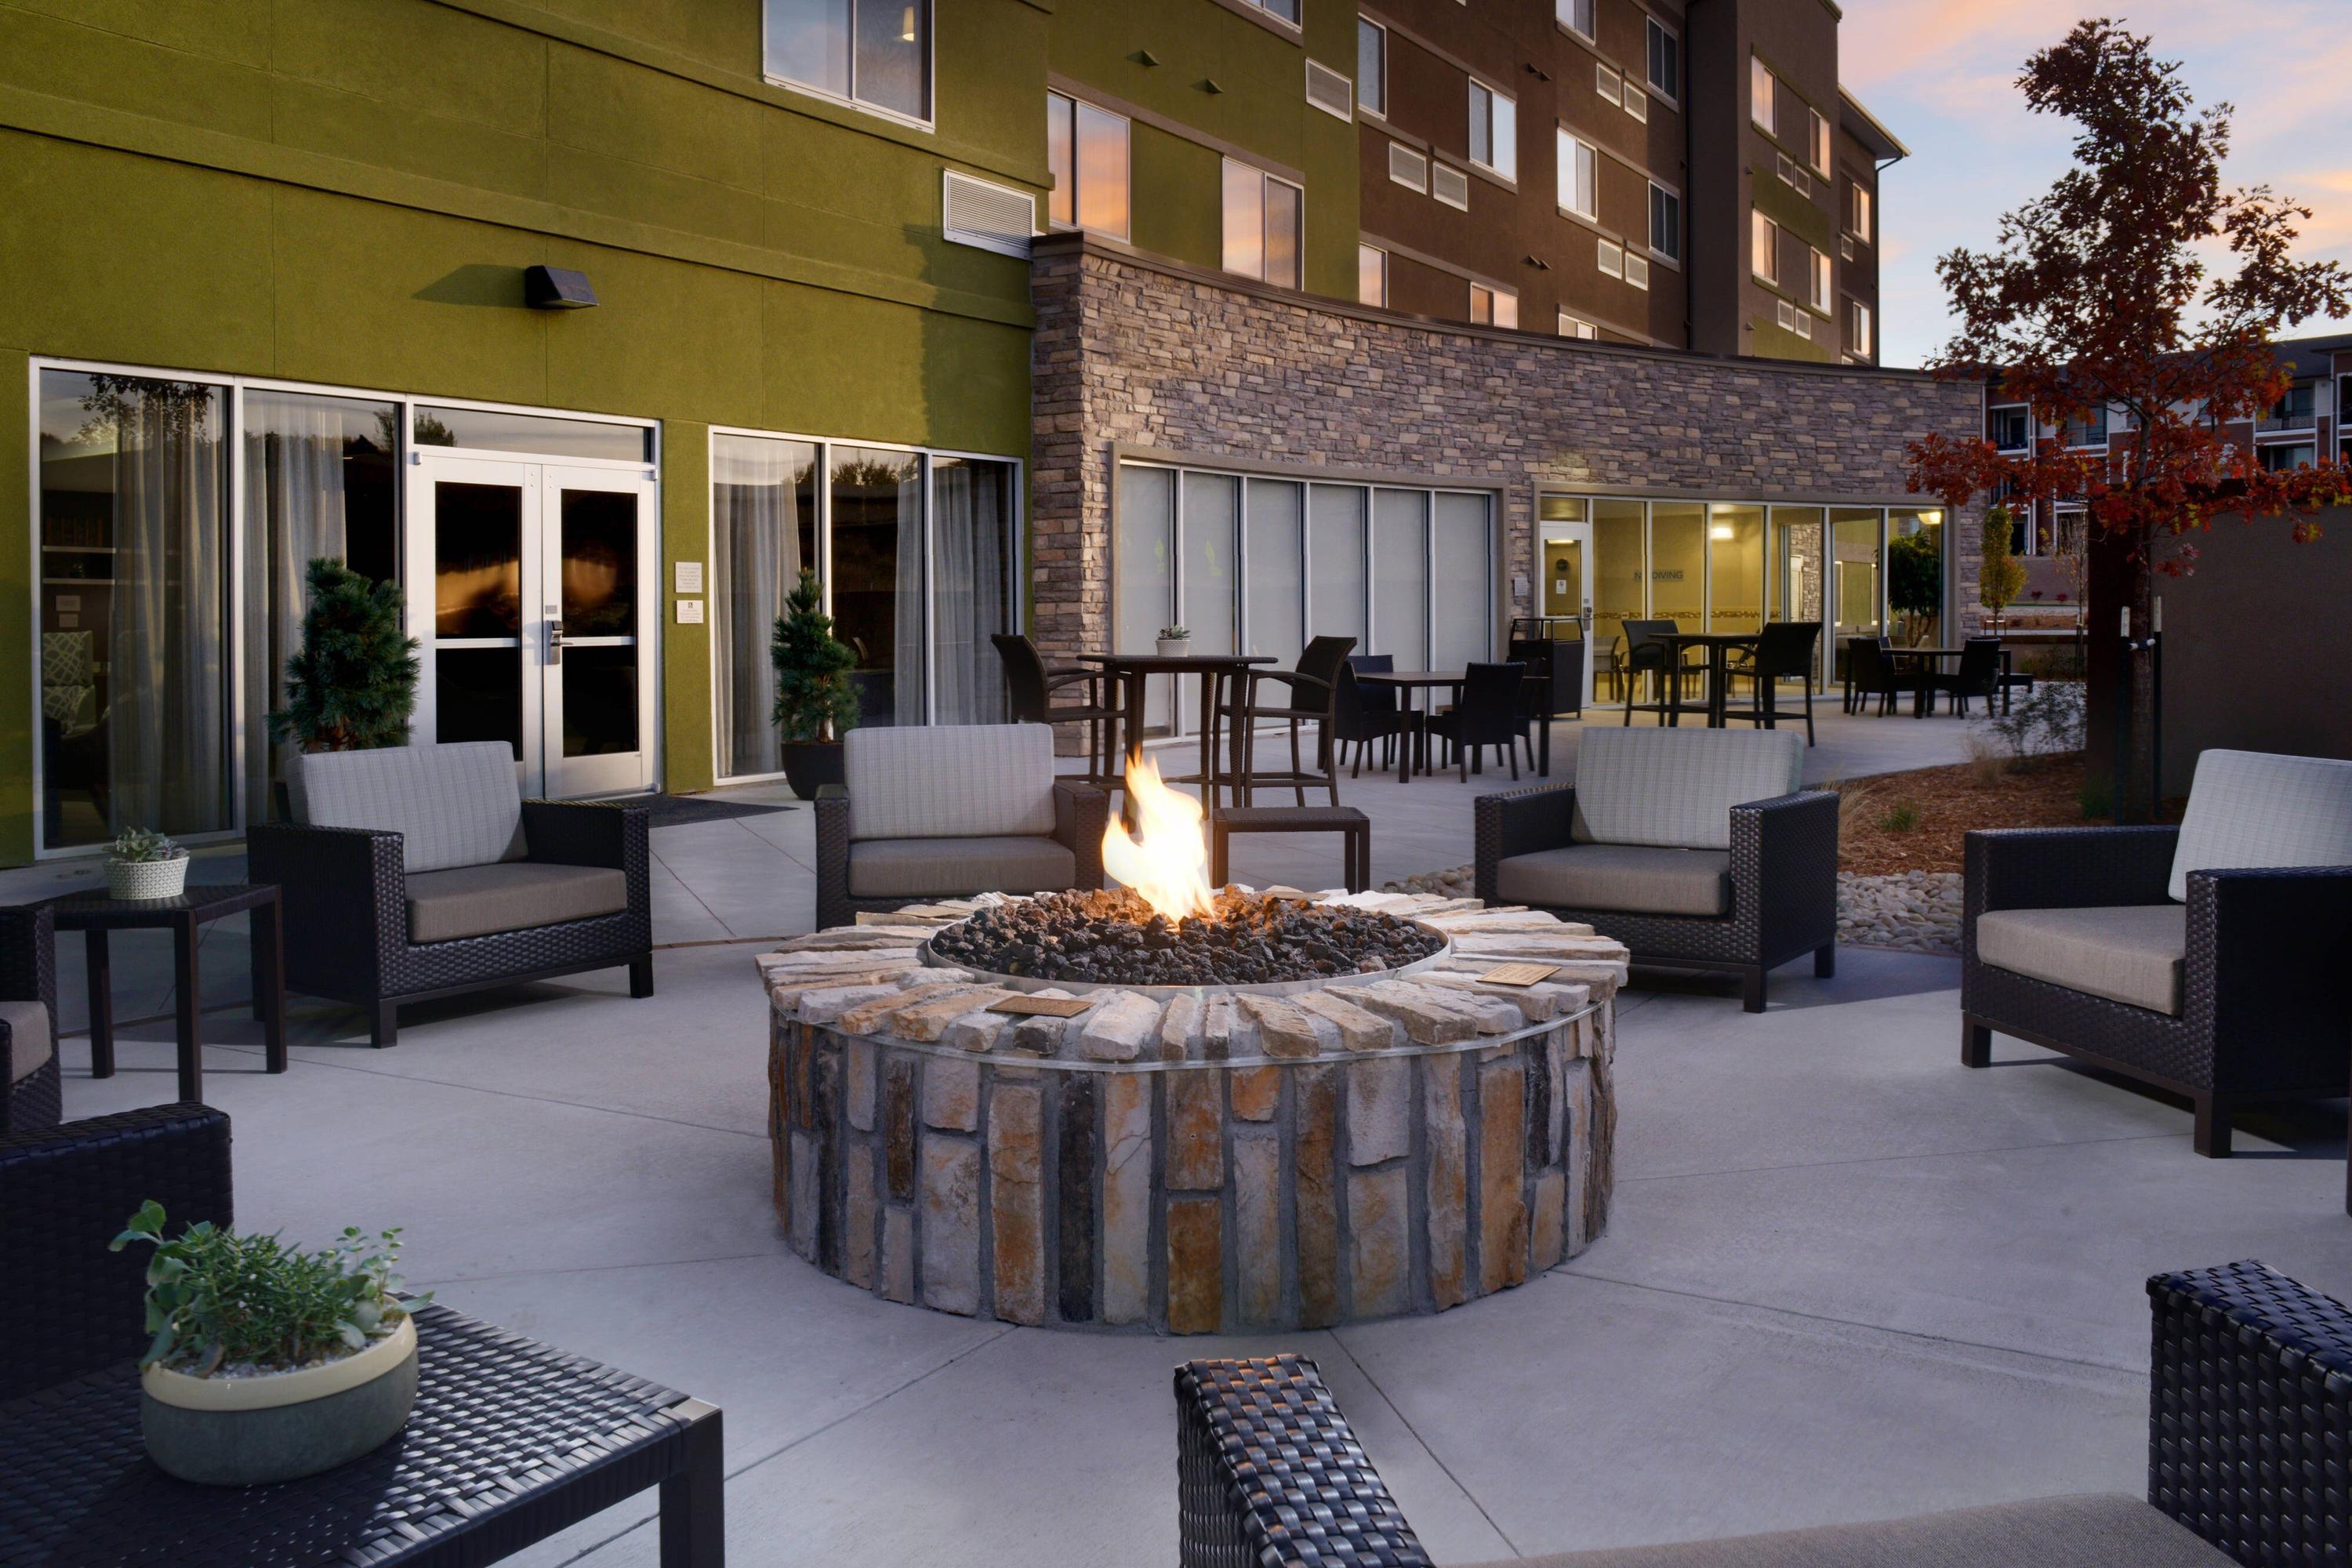 Hotel in South Denver  Courtyard by Marriott Denver South/Park Meadows Mall